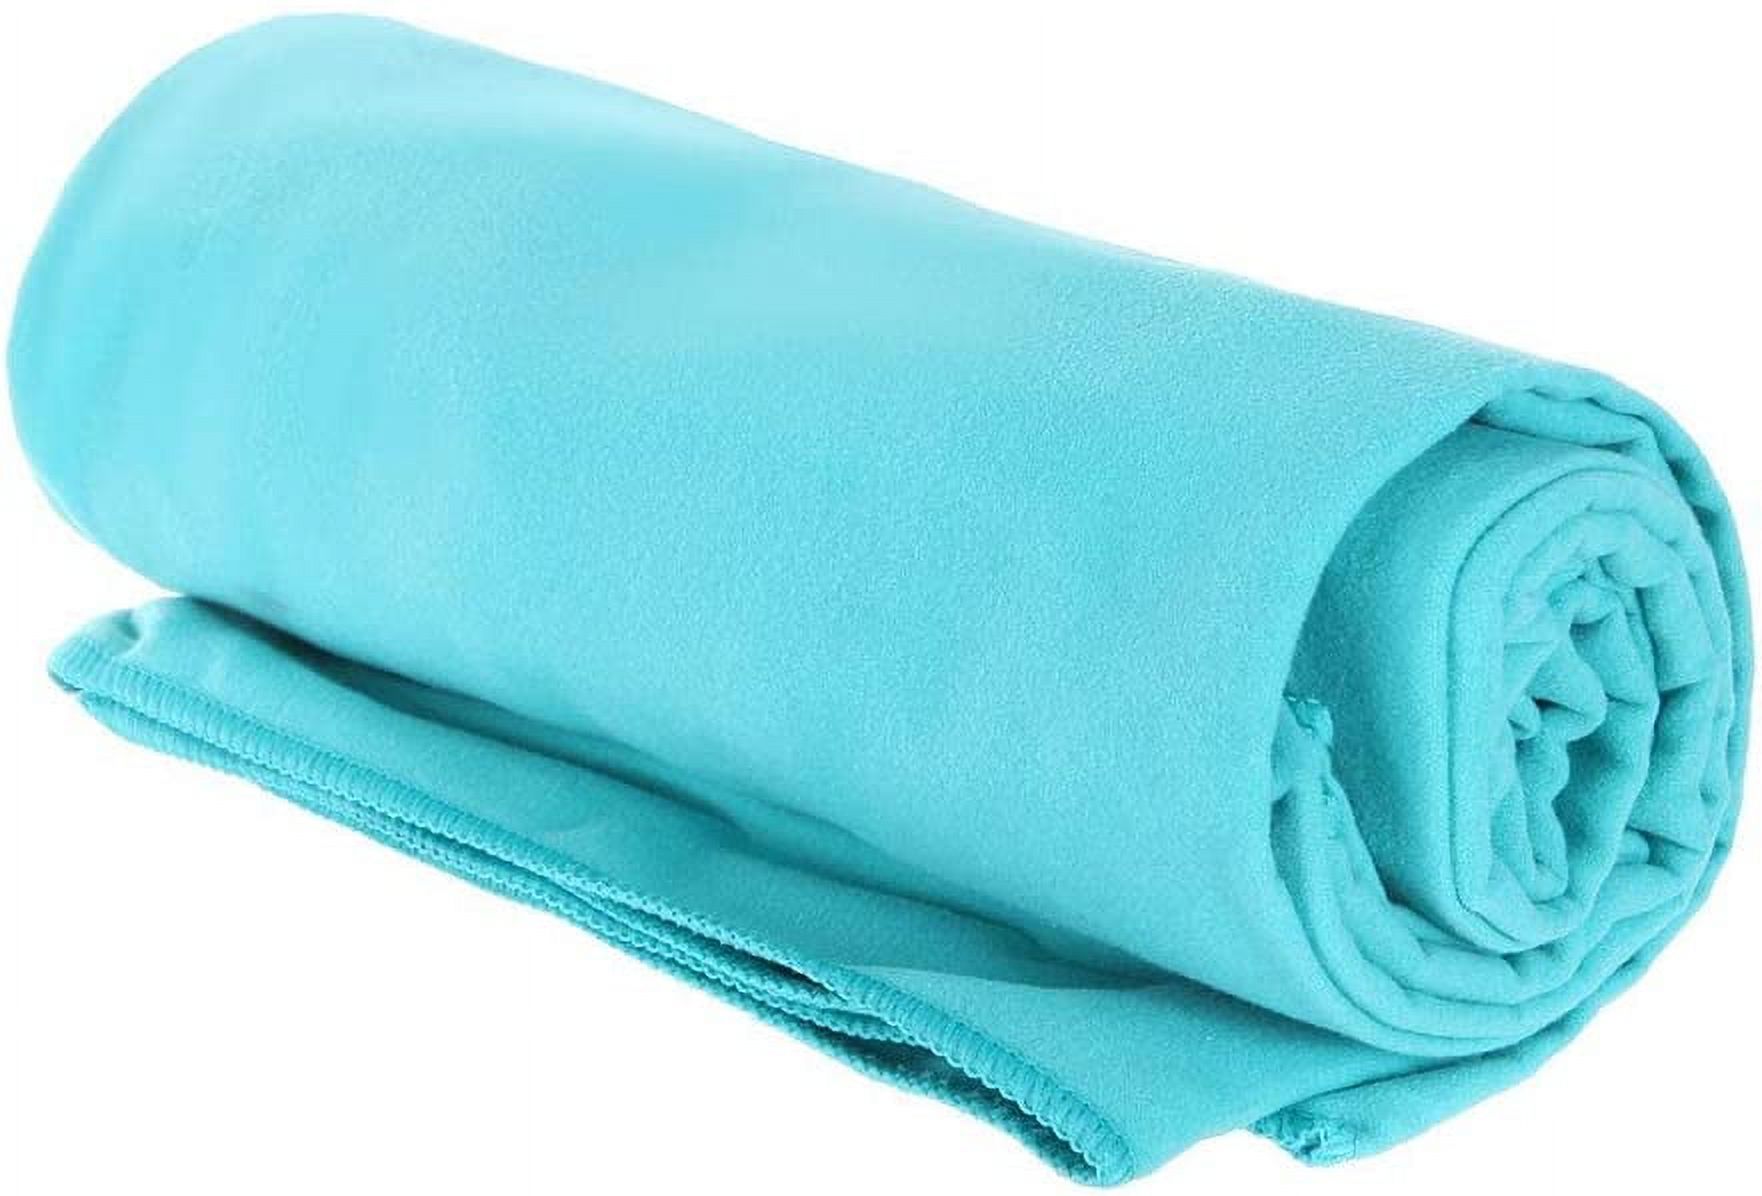 MINISO Cooling Towel, Microfiber Towel, Fast Drying Towel, Running Towel and Workout Towel for Sports, Workout, Fitness, Gym, Yoga, Running, Travel, Camping - Green - image 2 of 3